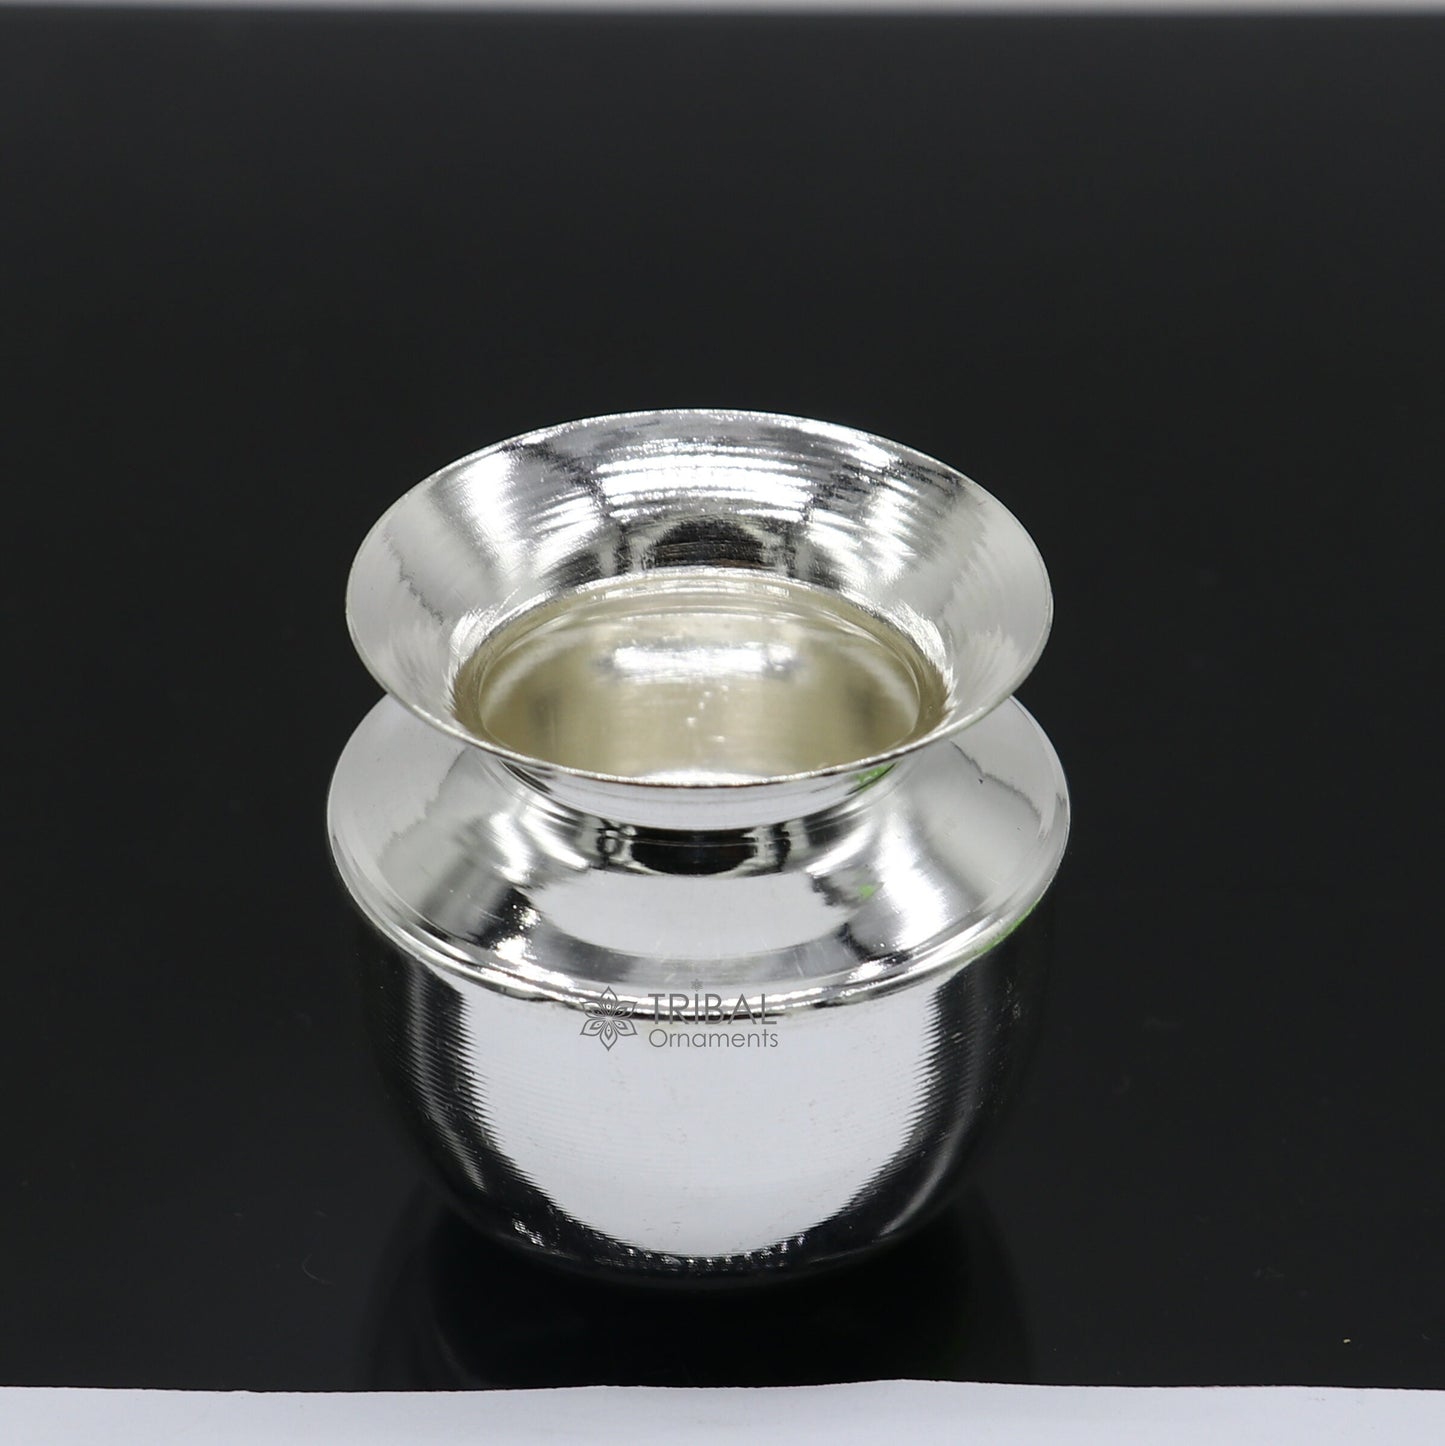 Pure 925 sterling silver handmade plain small Kalash or pot, unique special silver puja article, water or milk kalash pot india su1141 - TRIBAL ORNAMENTS